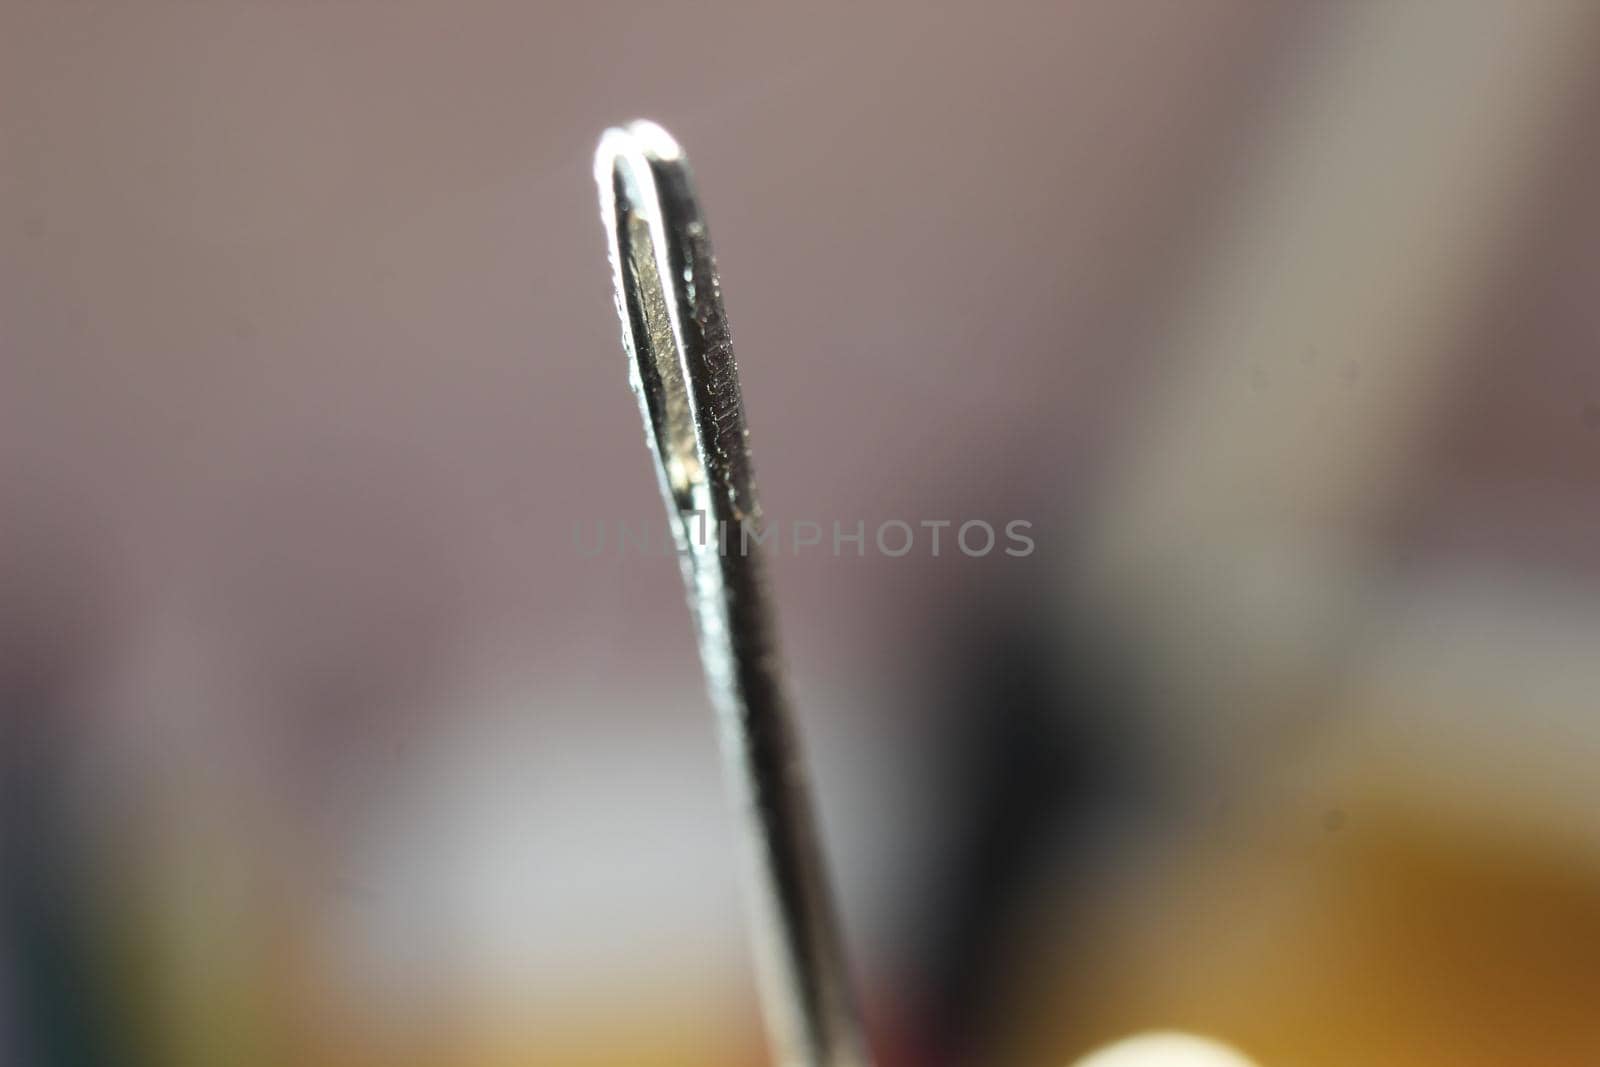 Macro photograph of sewing needle. Small needle with empty eyelet, isolated over the black background.